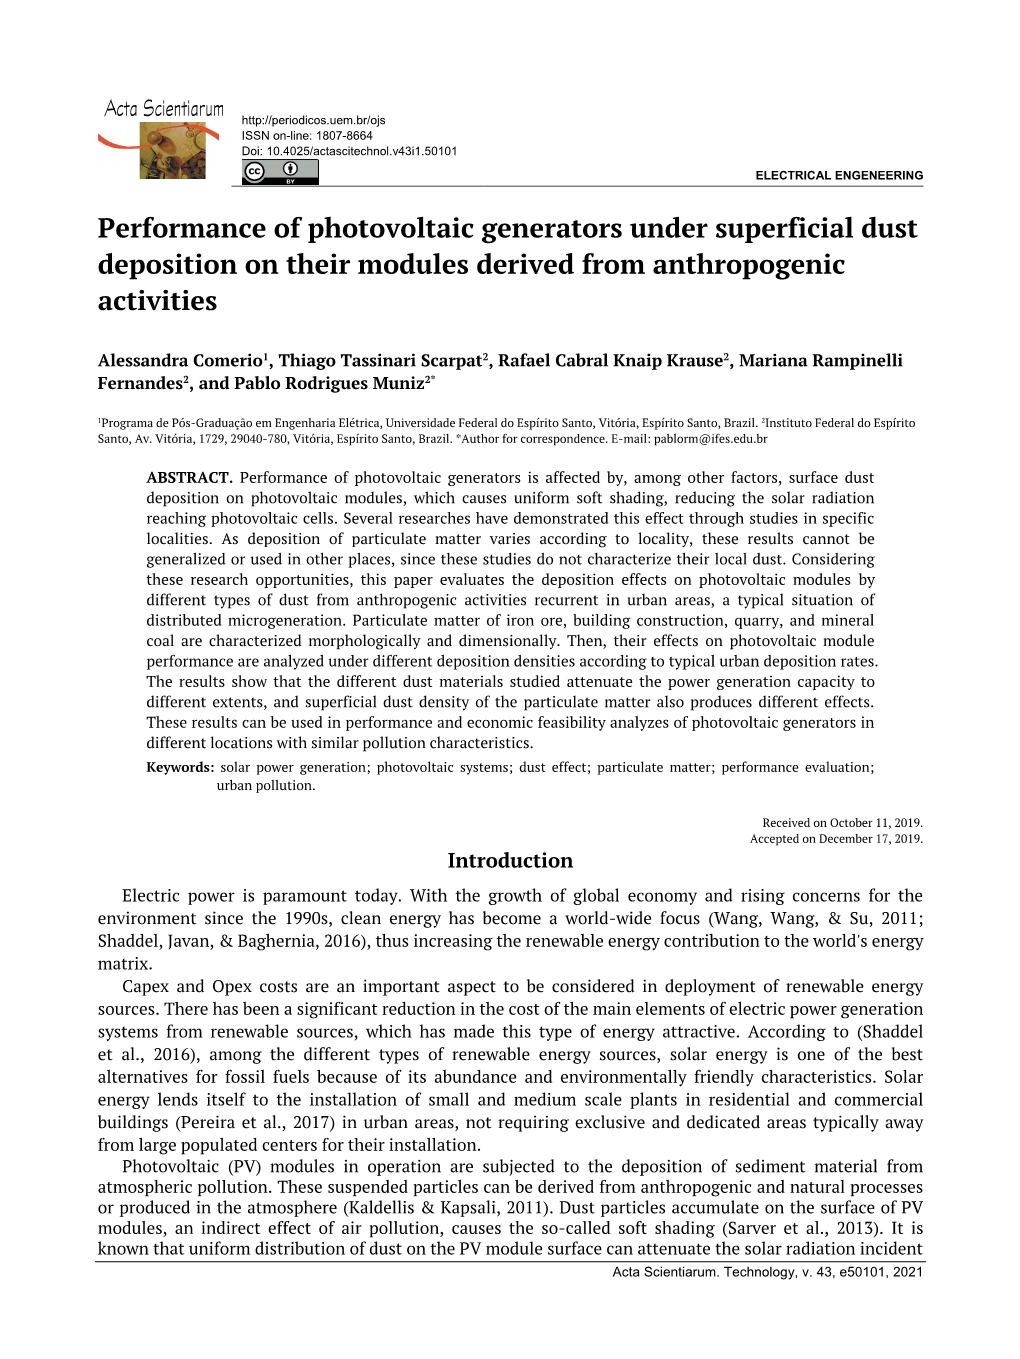 Performance of Photovoltaic Generators Under Superficial Dust Deposition on Their Modules Derived from Anthropogenic Activities